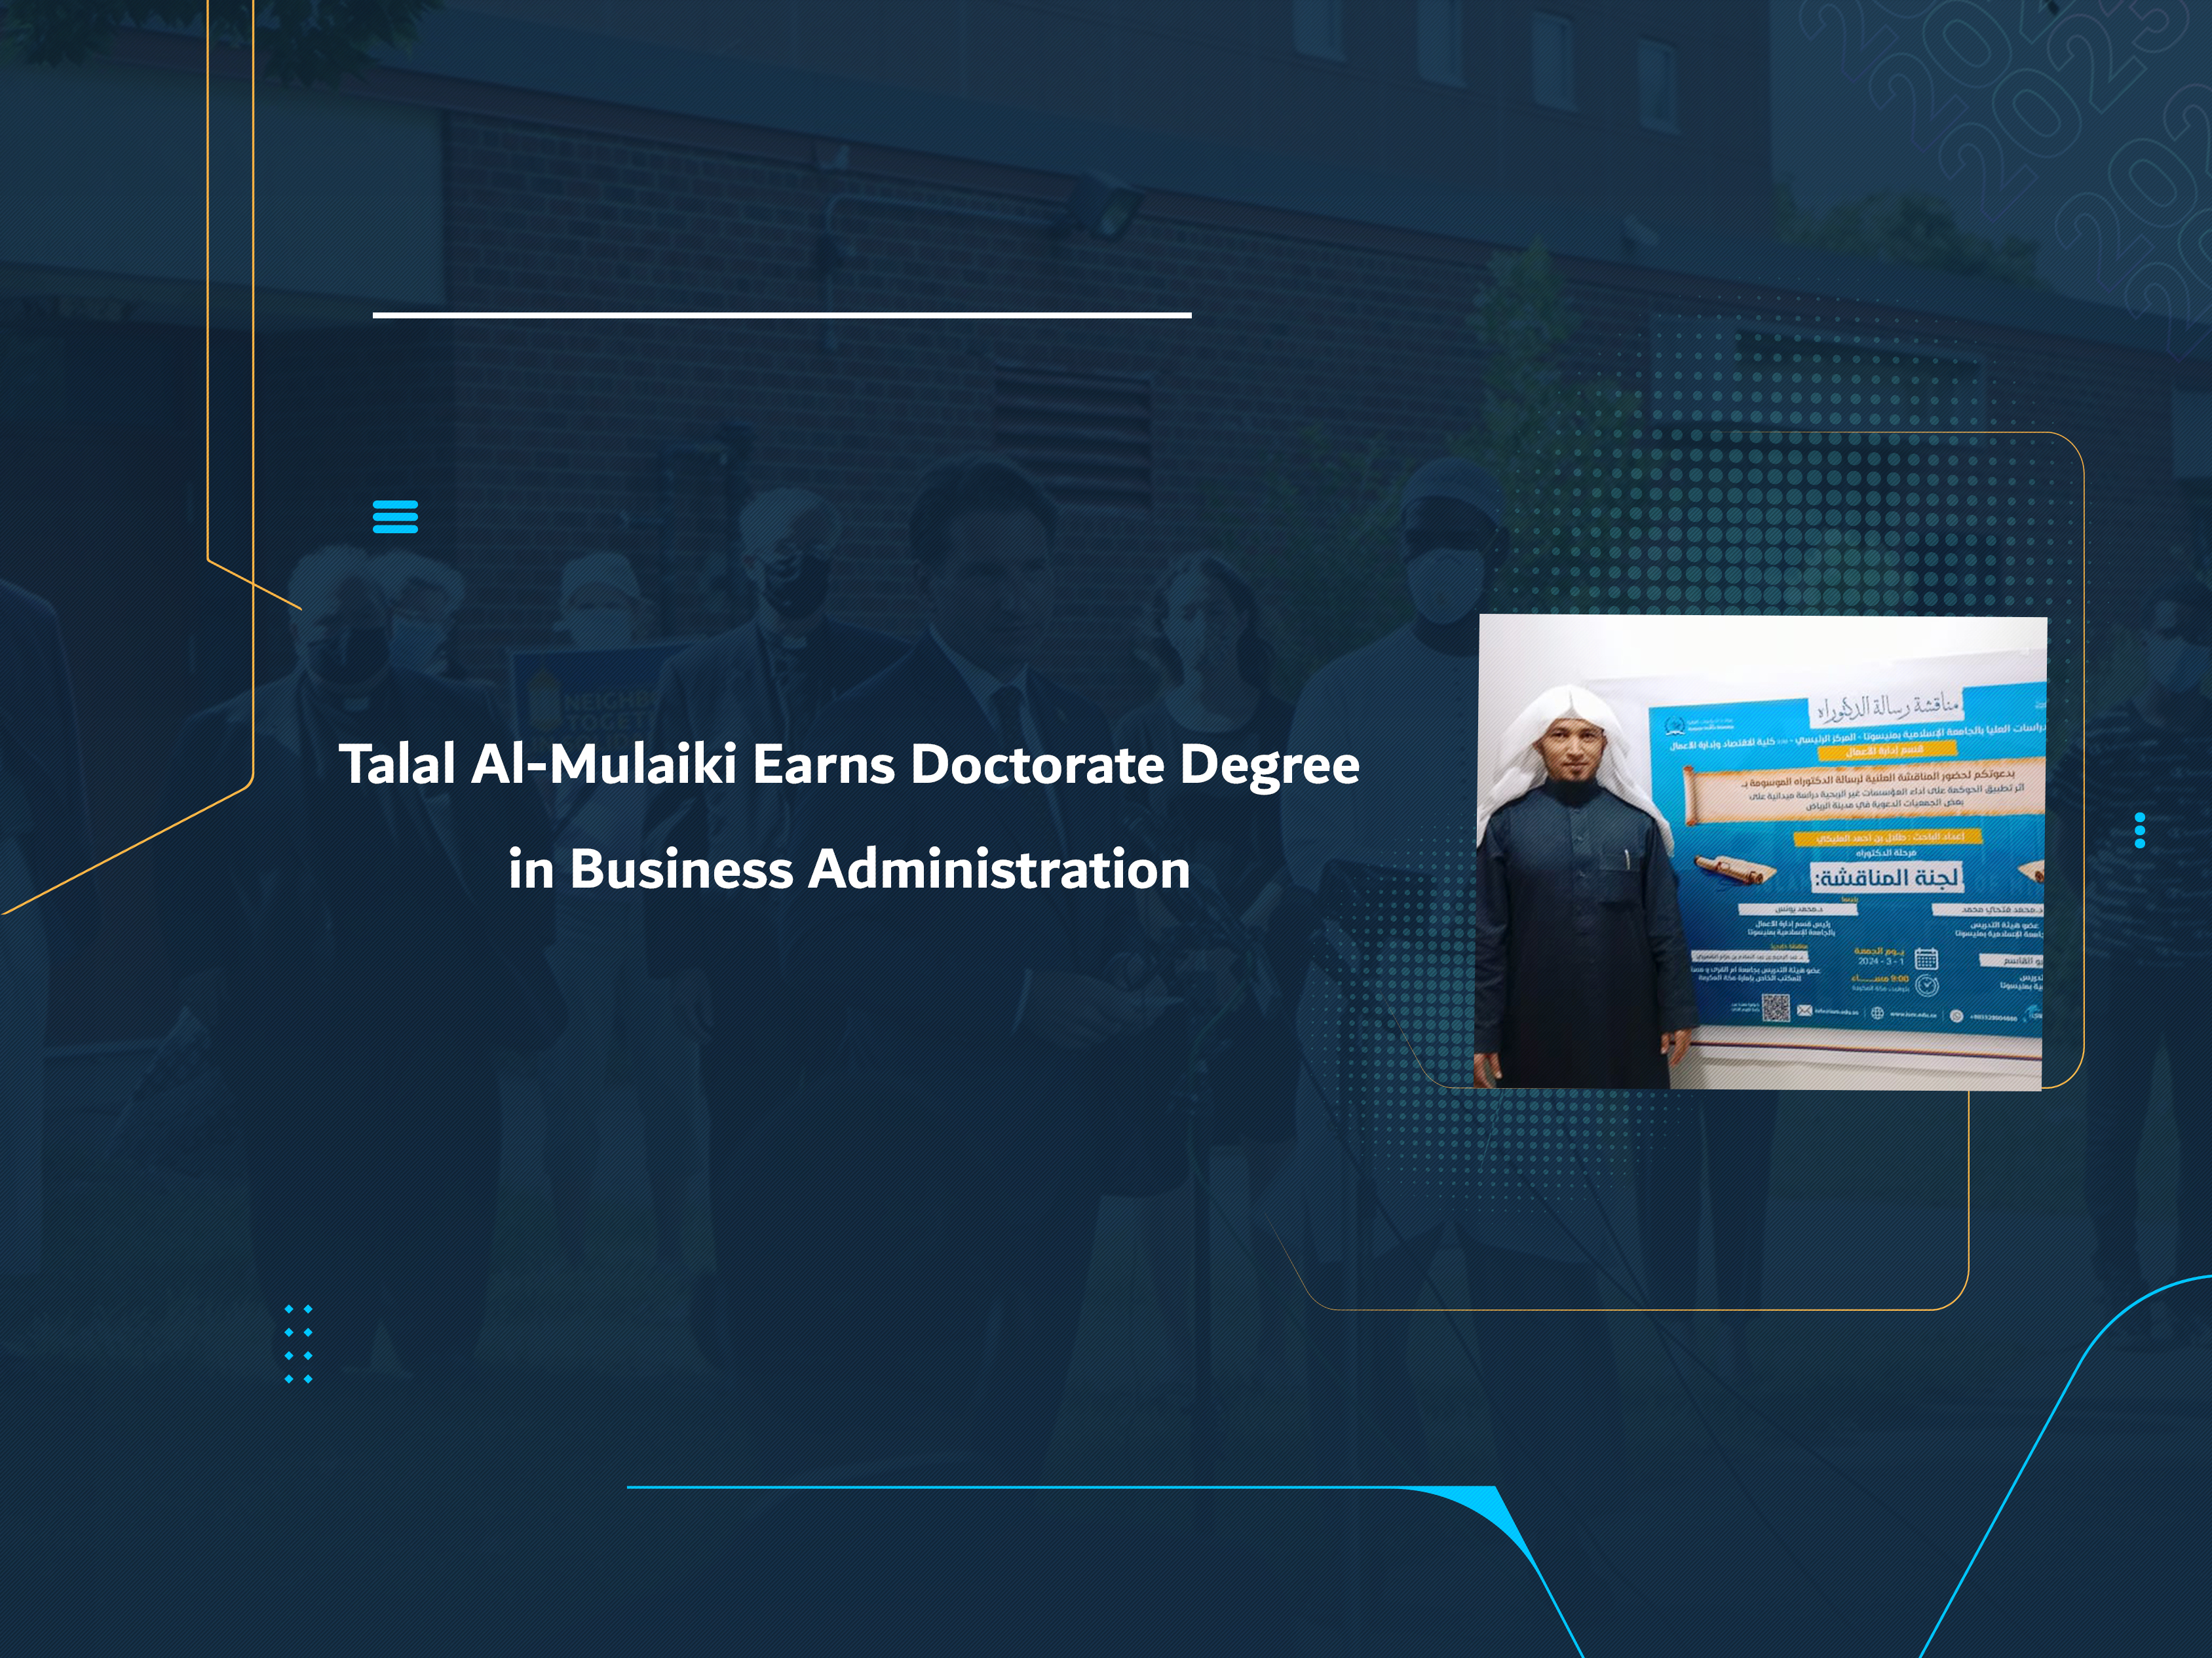 Talal Al-Mulaiki Earns Doctorate Degree in Business Administration